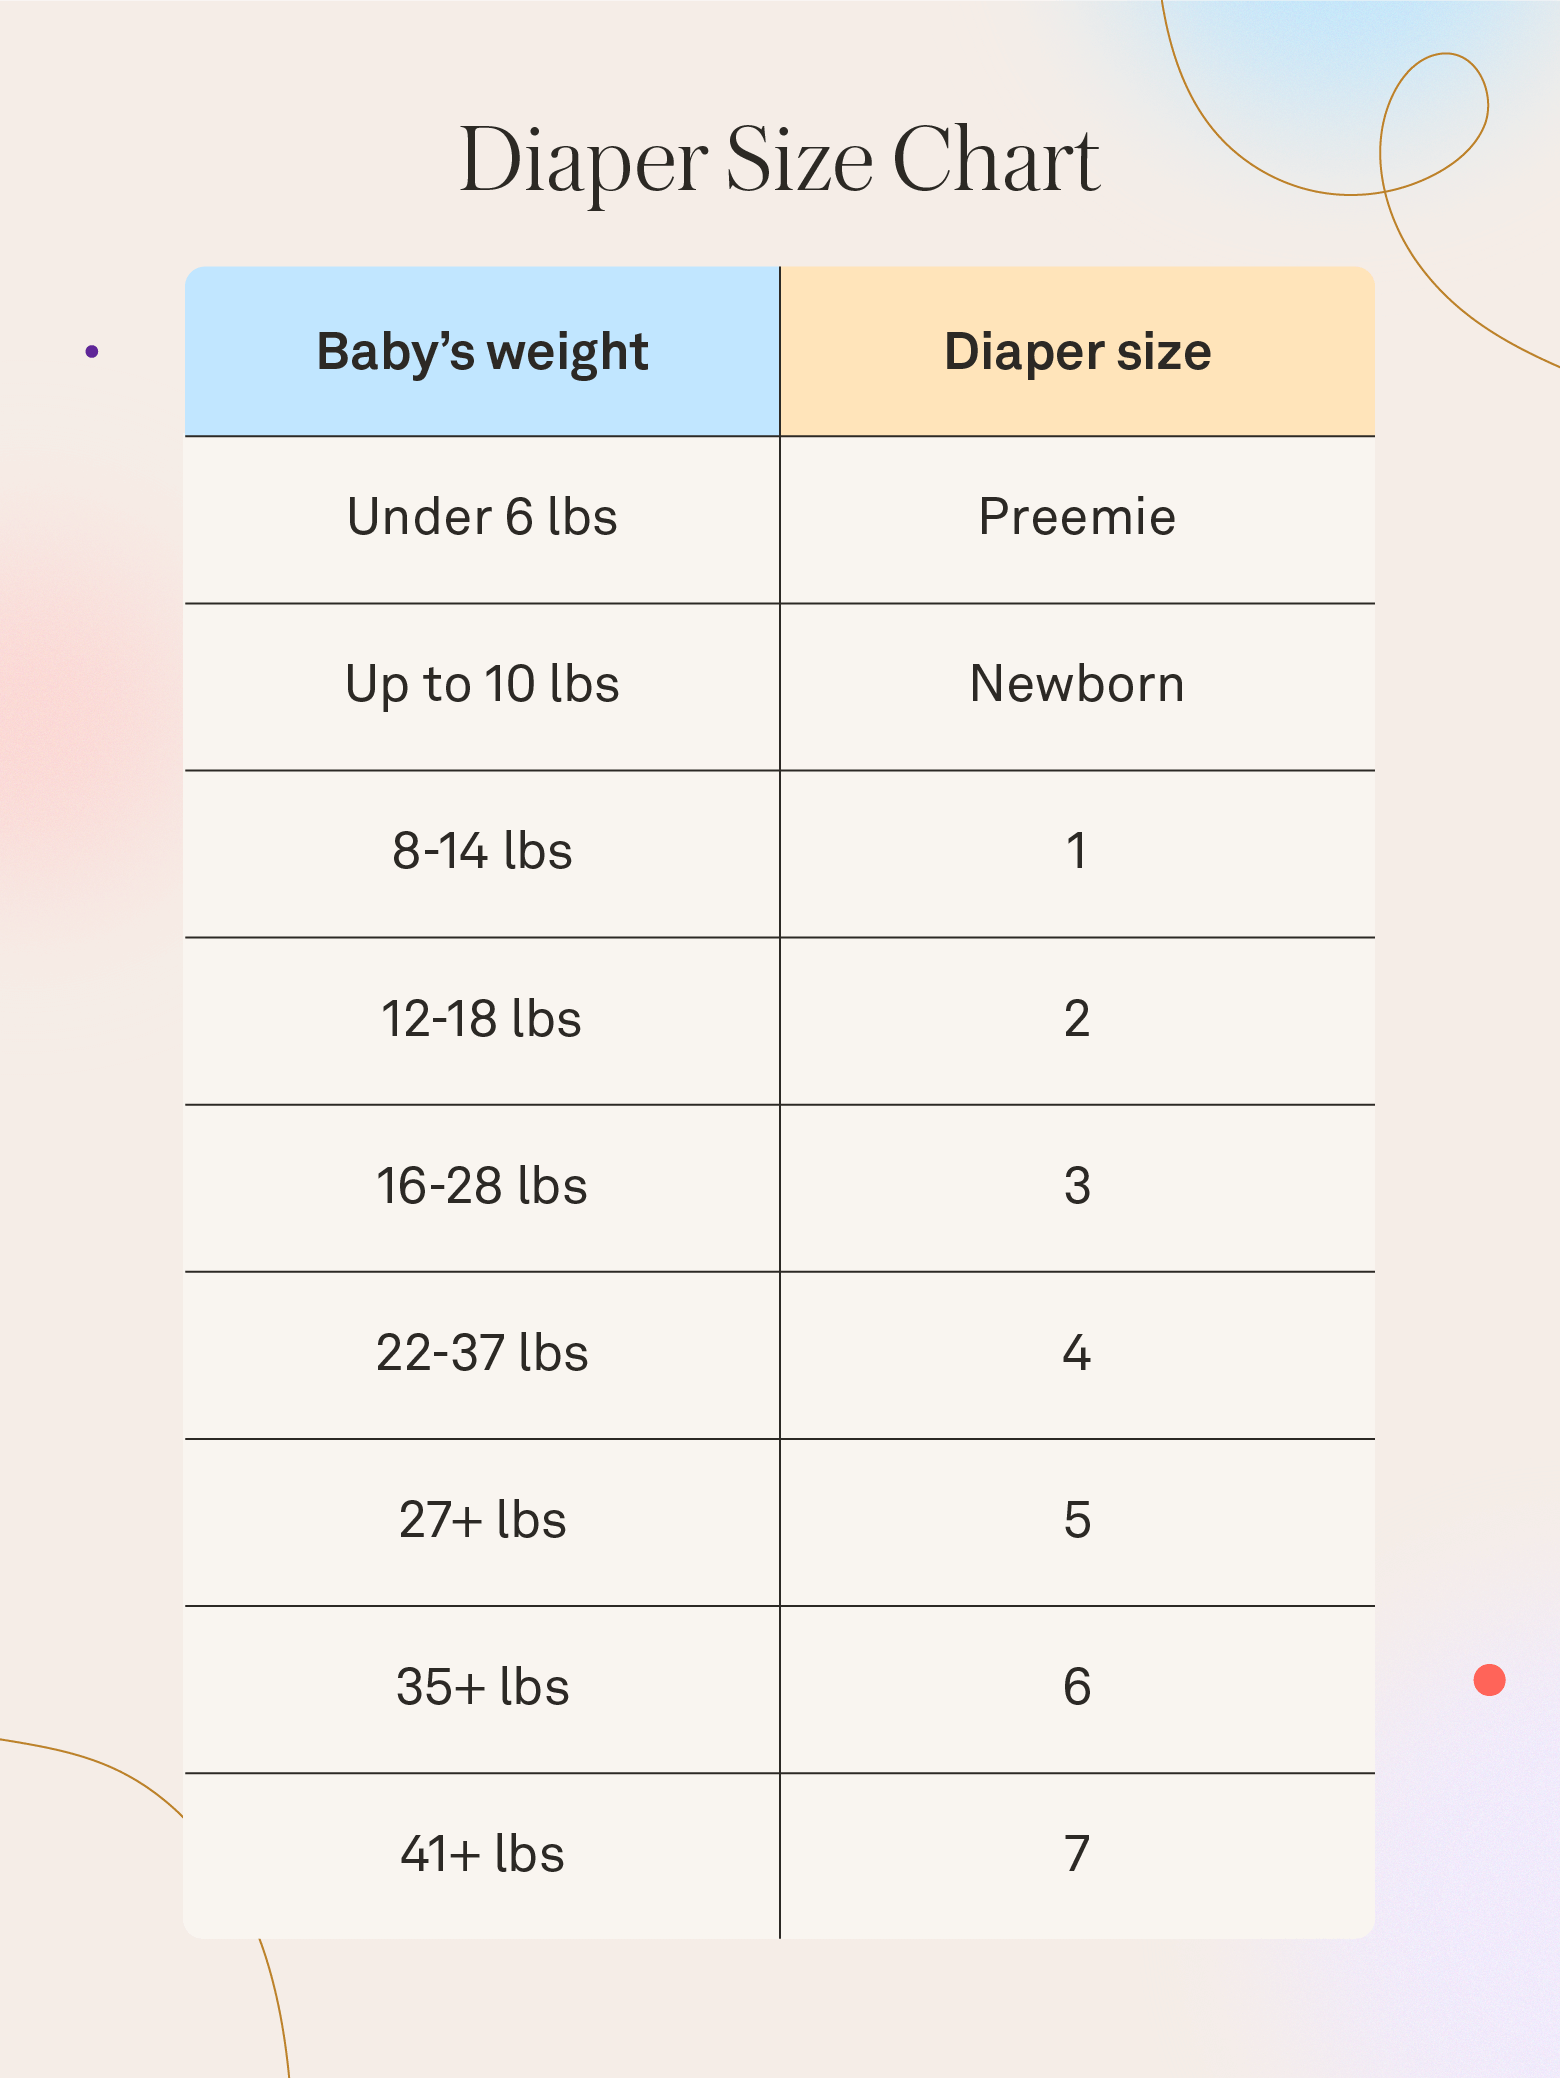 Diaper size chart, listing the weight a baby should be for each diaper size